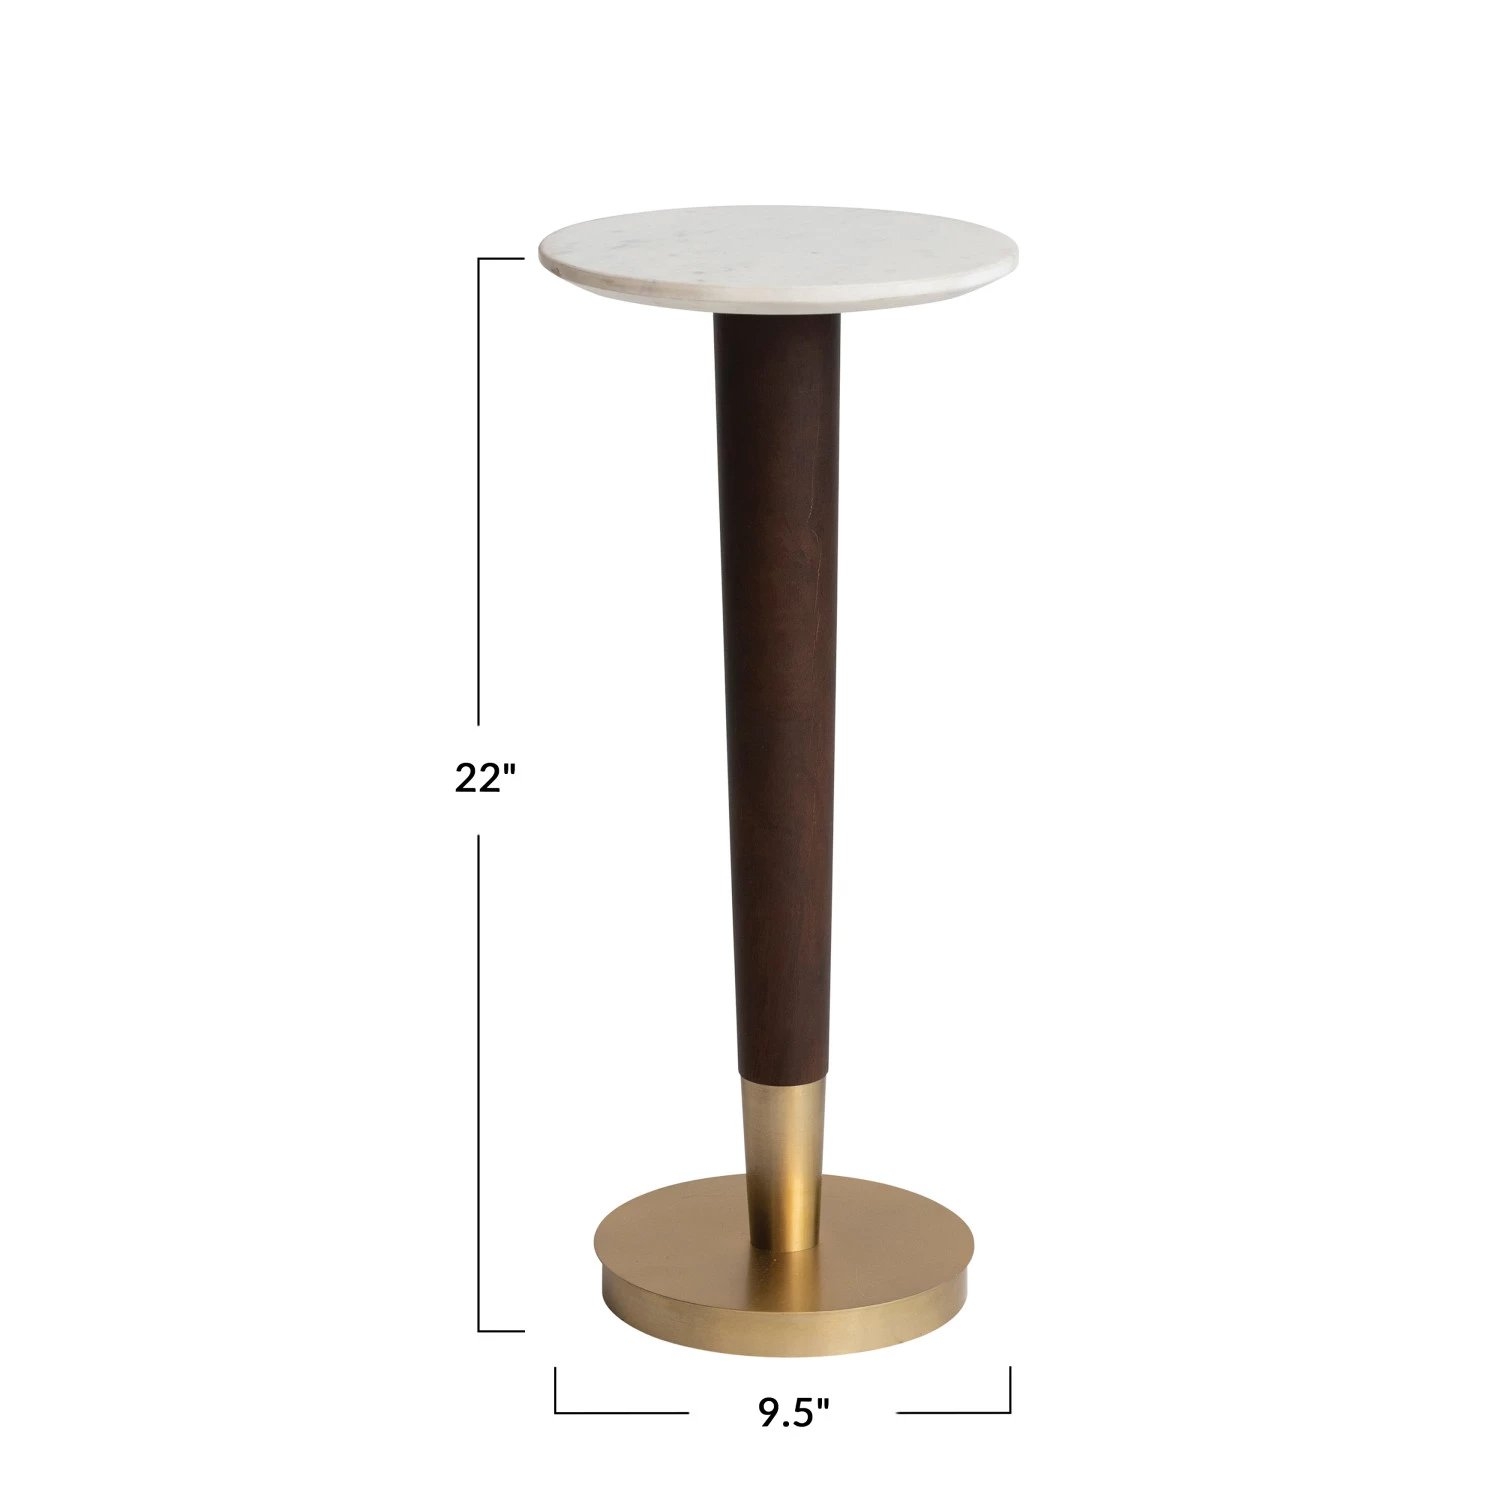 Acacia Wood and Metal Martini Table with Marble Top, Walnut and Brass - Image 2